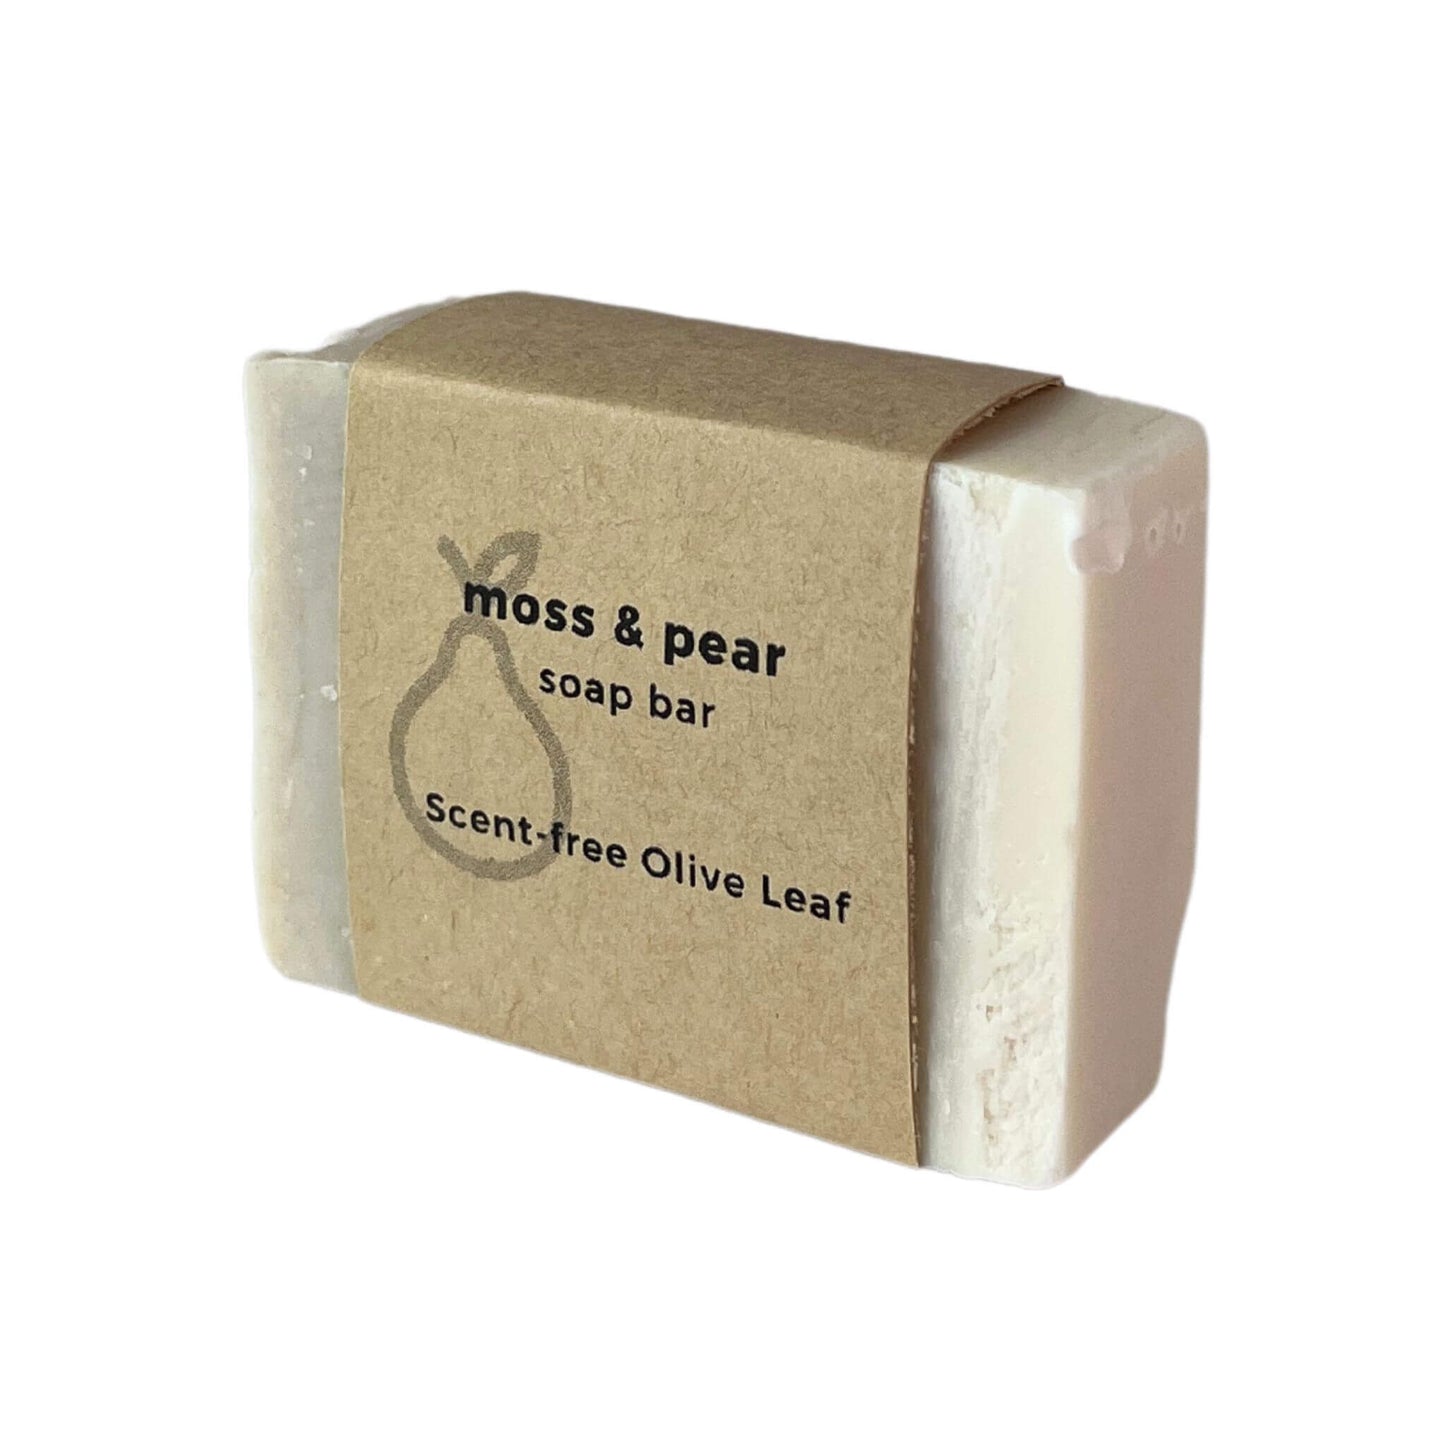 moss & pear pure olive oil soap bar with brown wrap